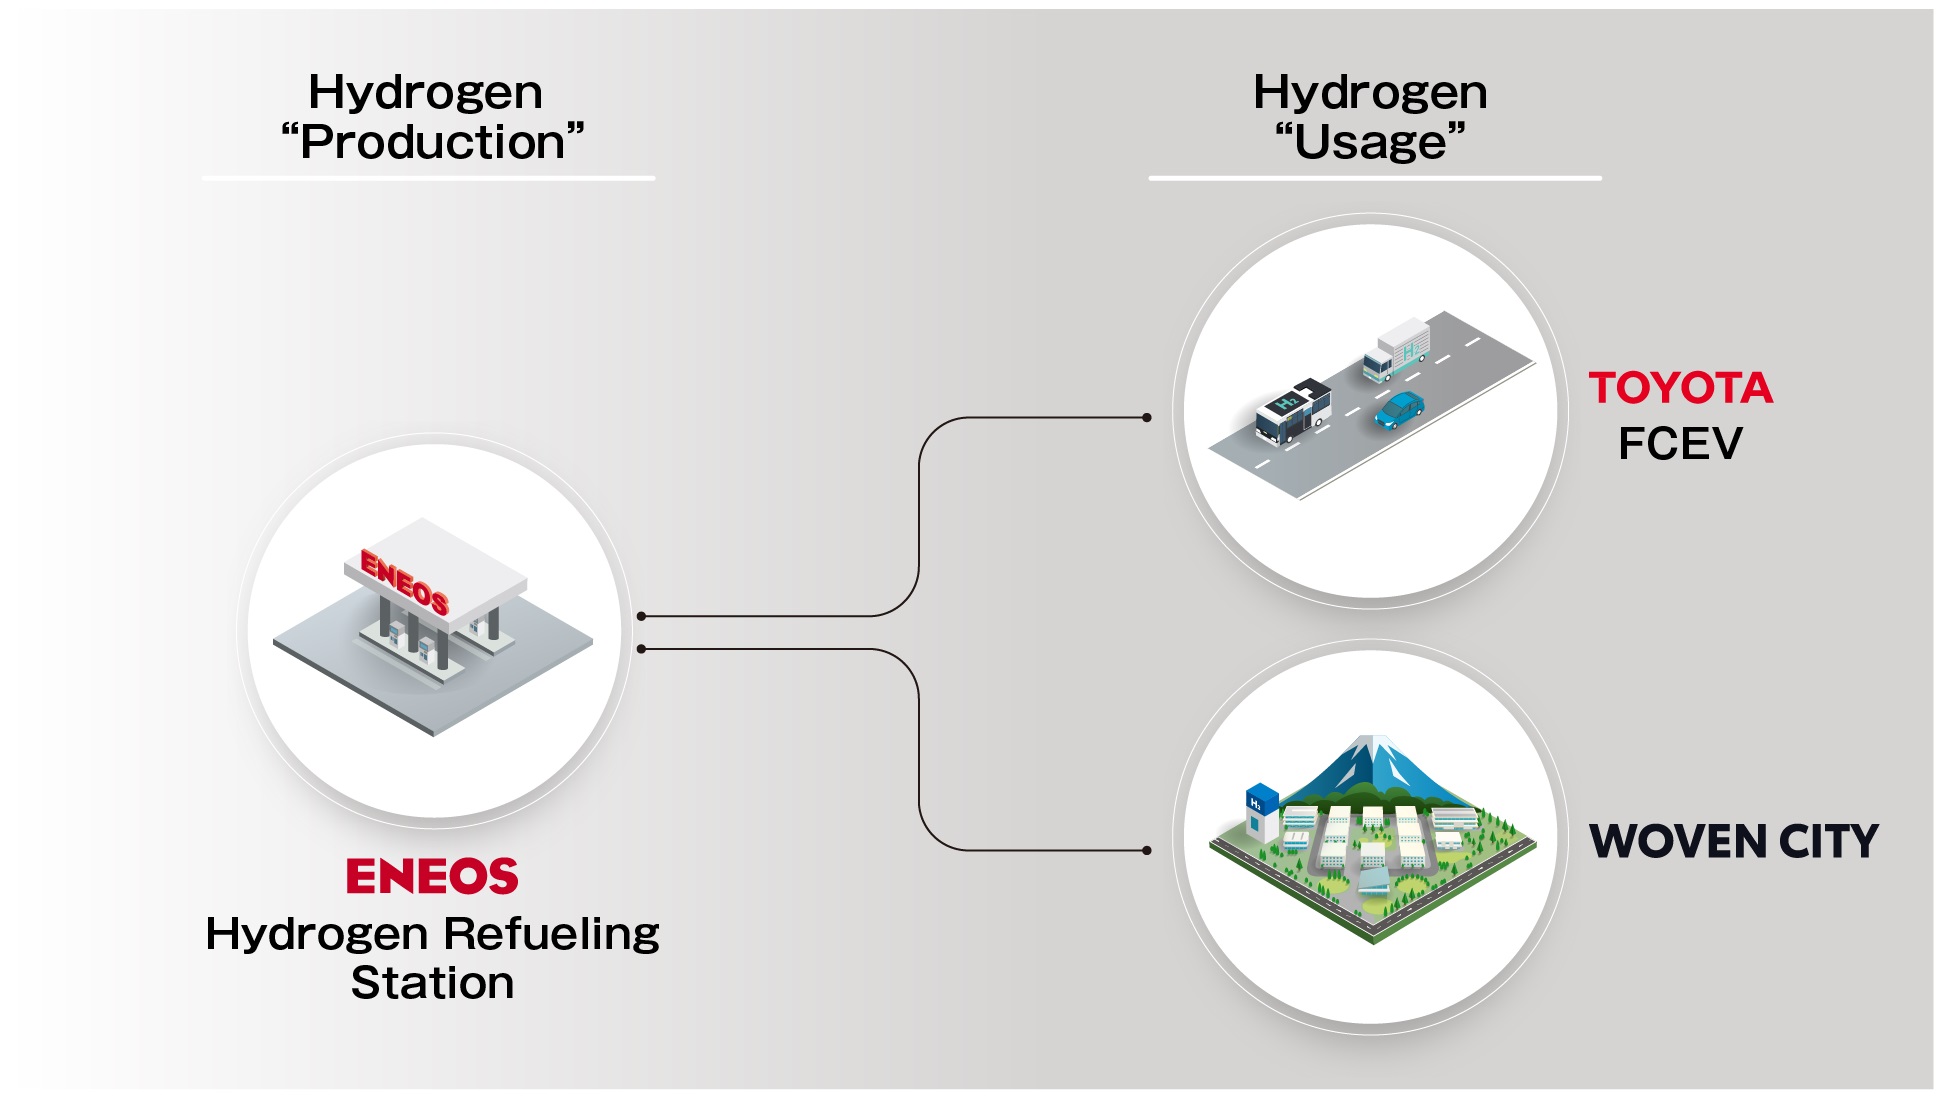 Overview of the collaboration between ENEOS, Toyota, and Woven Planet to facilitate CO2-free hydrogen production and usage for Woven City